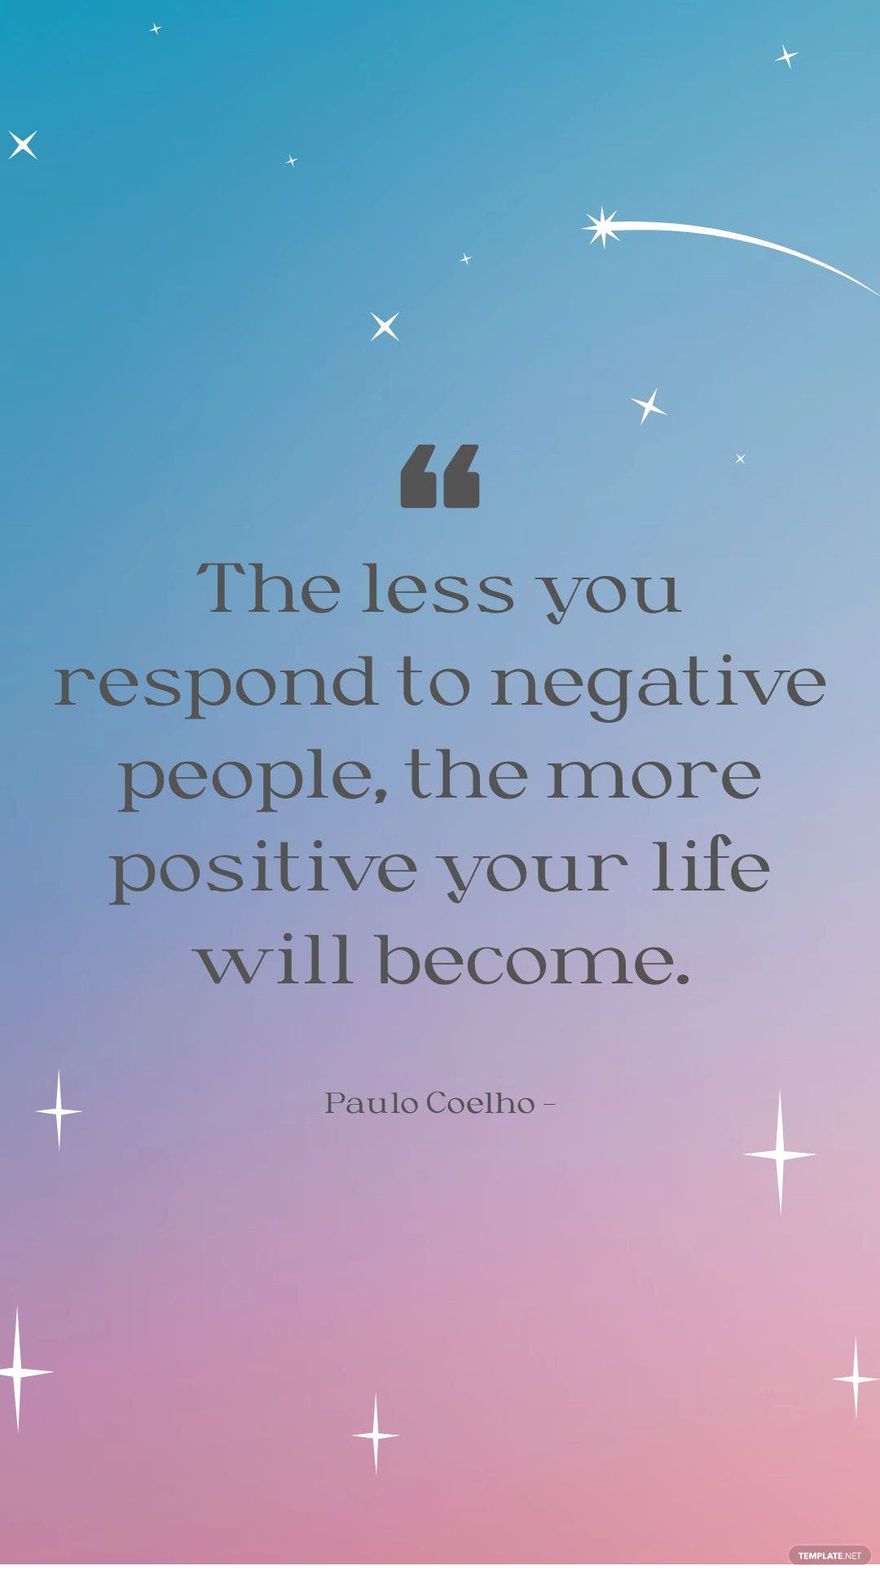 Paulo Coelho - The less you respond to negative people, the more positive your life will become.